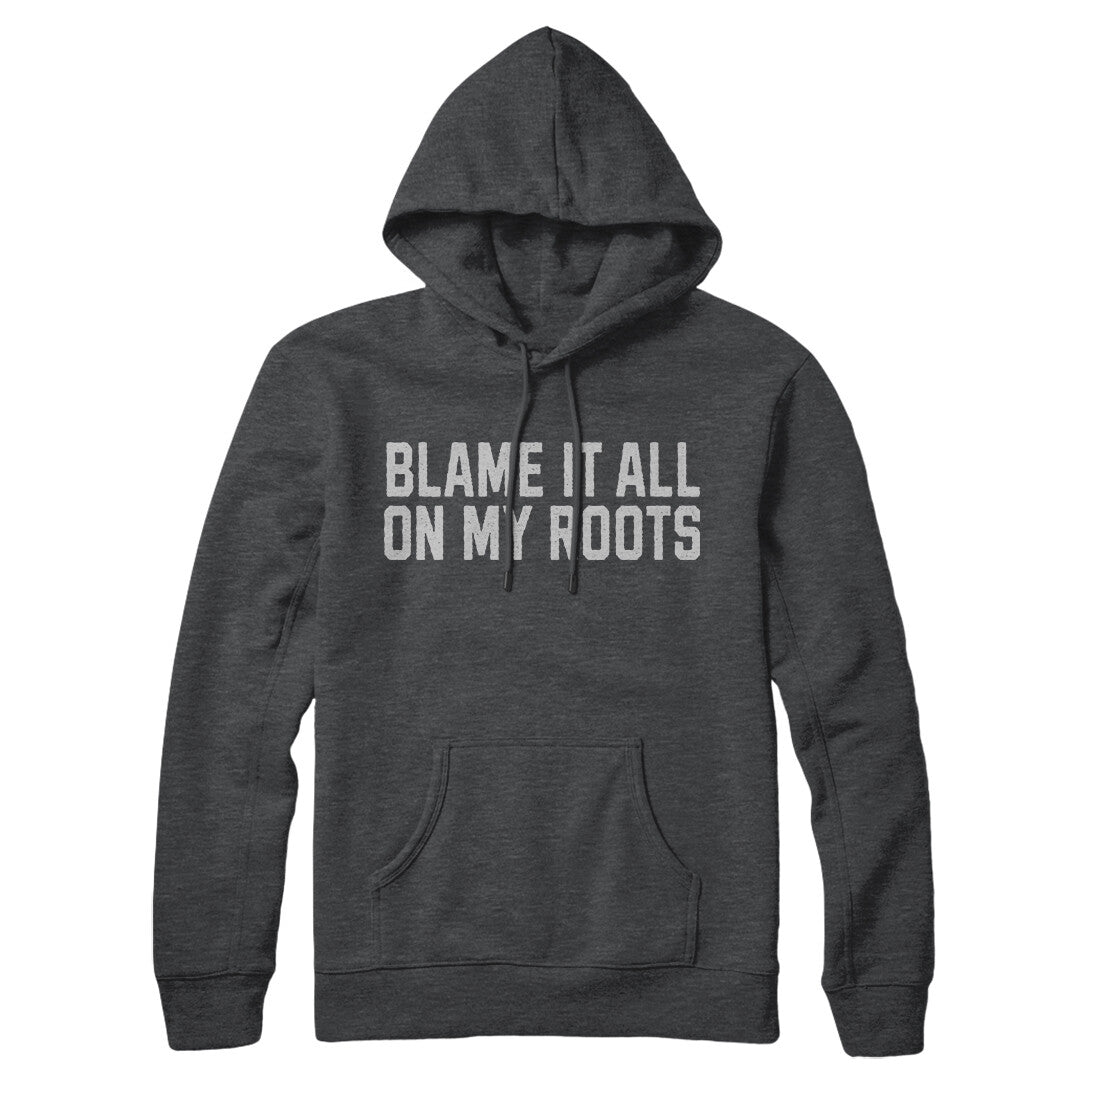 Blame it All on my Roots in Charcoal Heather Color